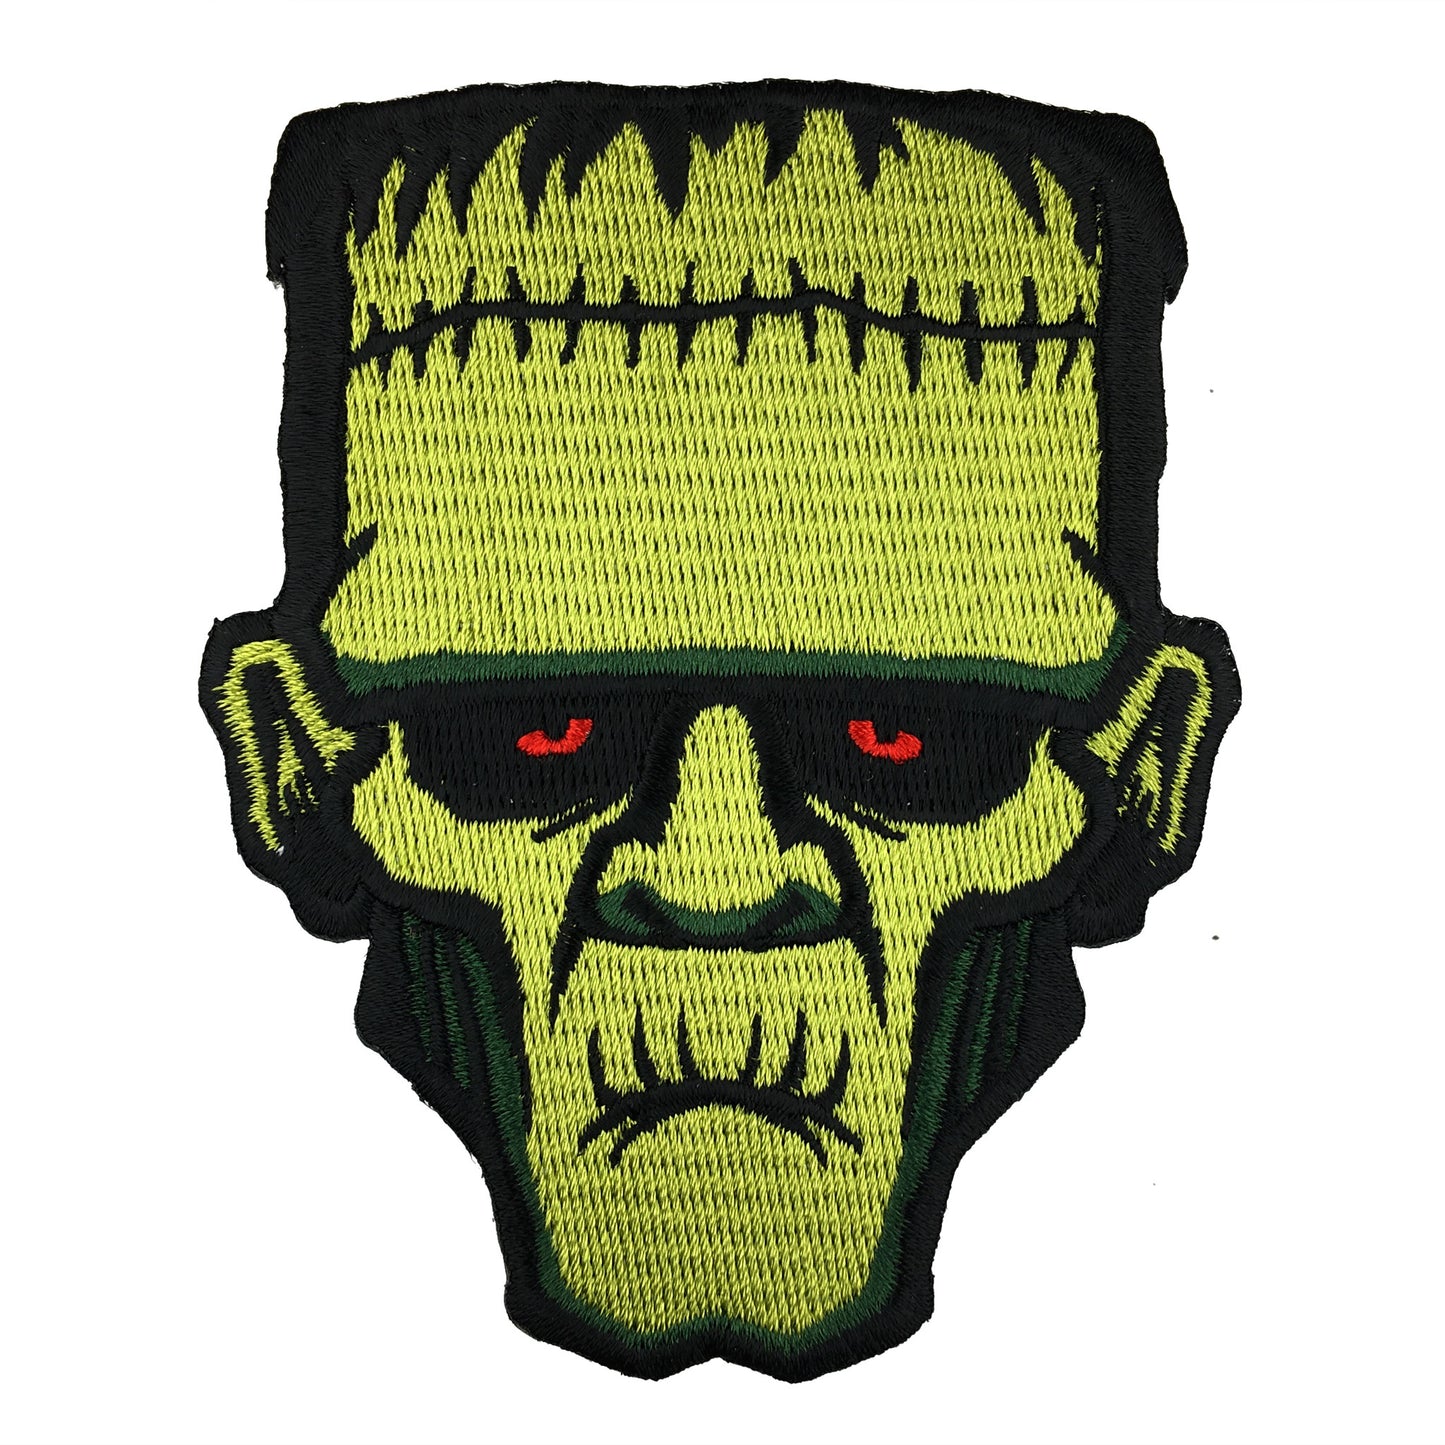 Frankenstein's Monster horror monster head embroidered patch by Monsterologist